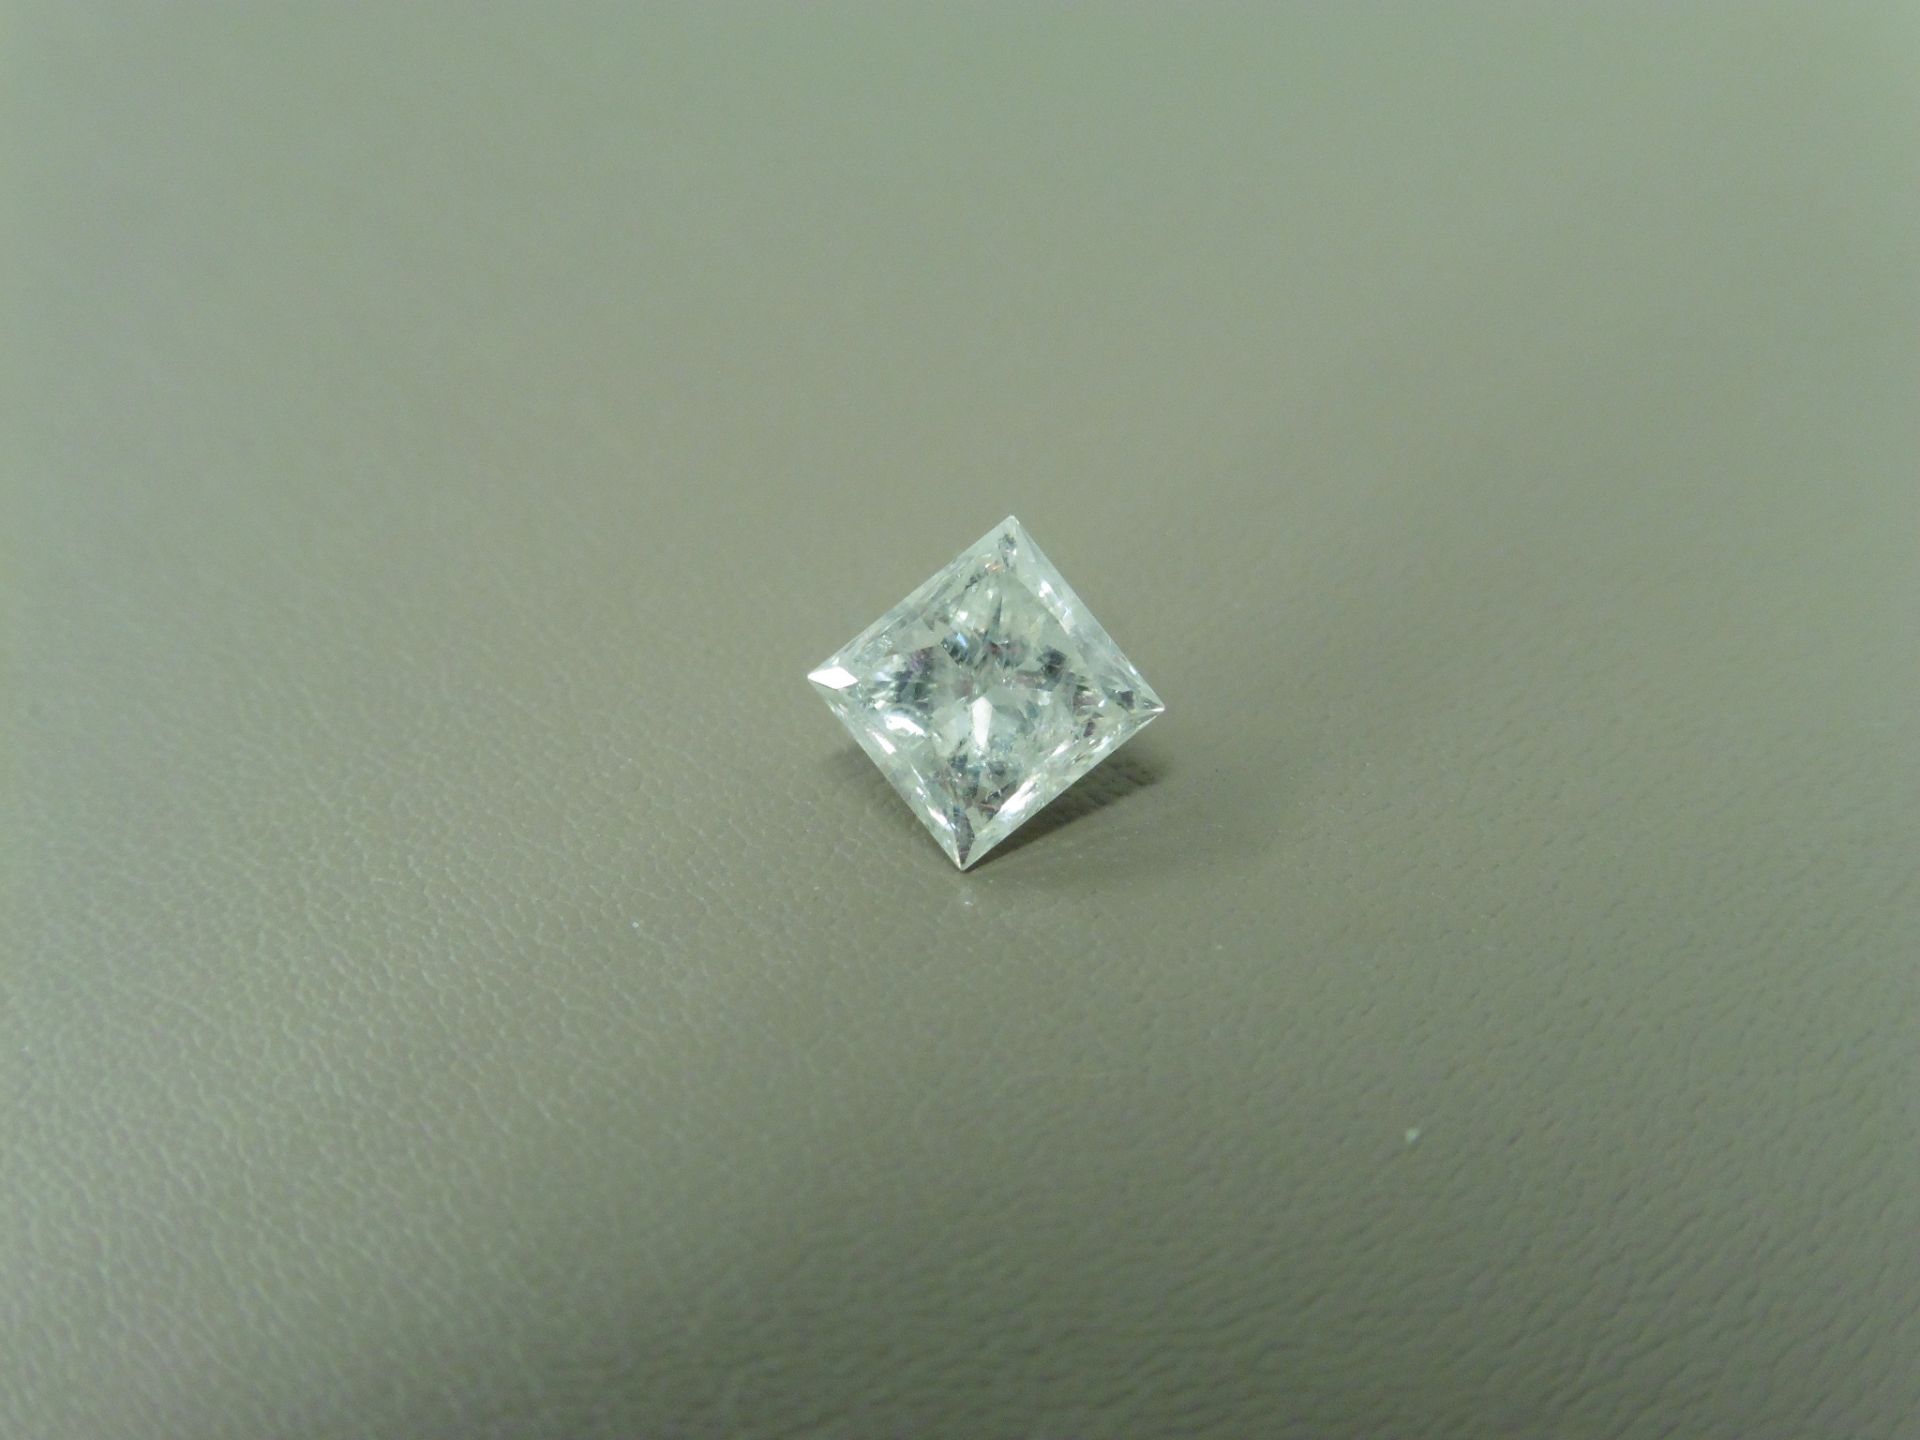 1.09ct enhanced princess cut diamond. G colour and I2 clarity. No certification but can be done